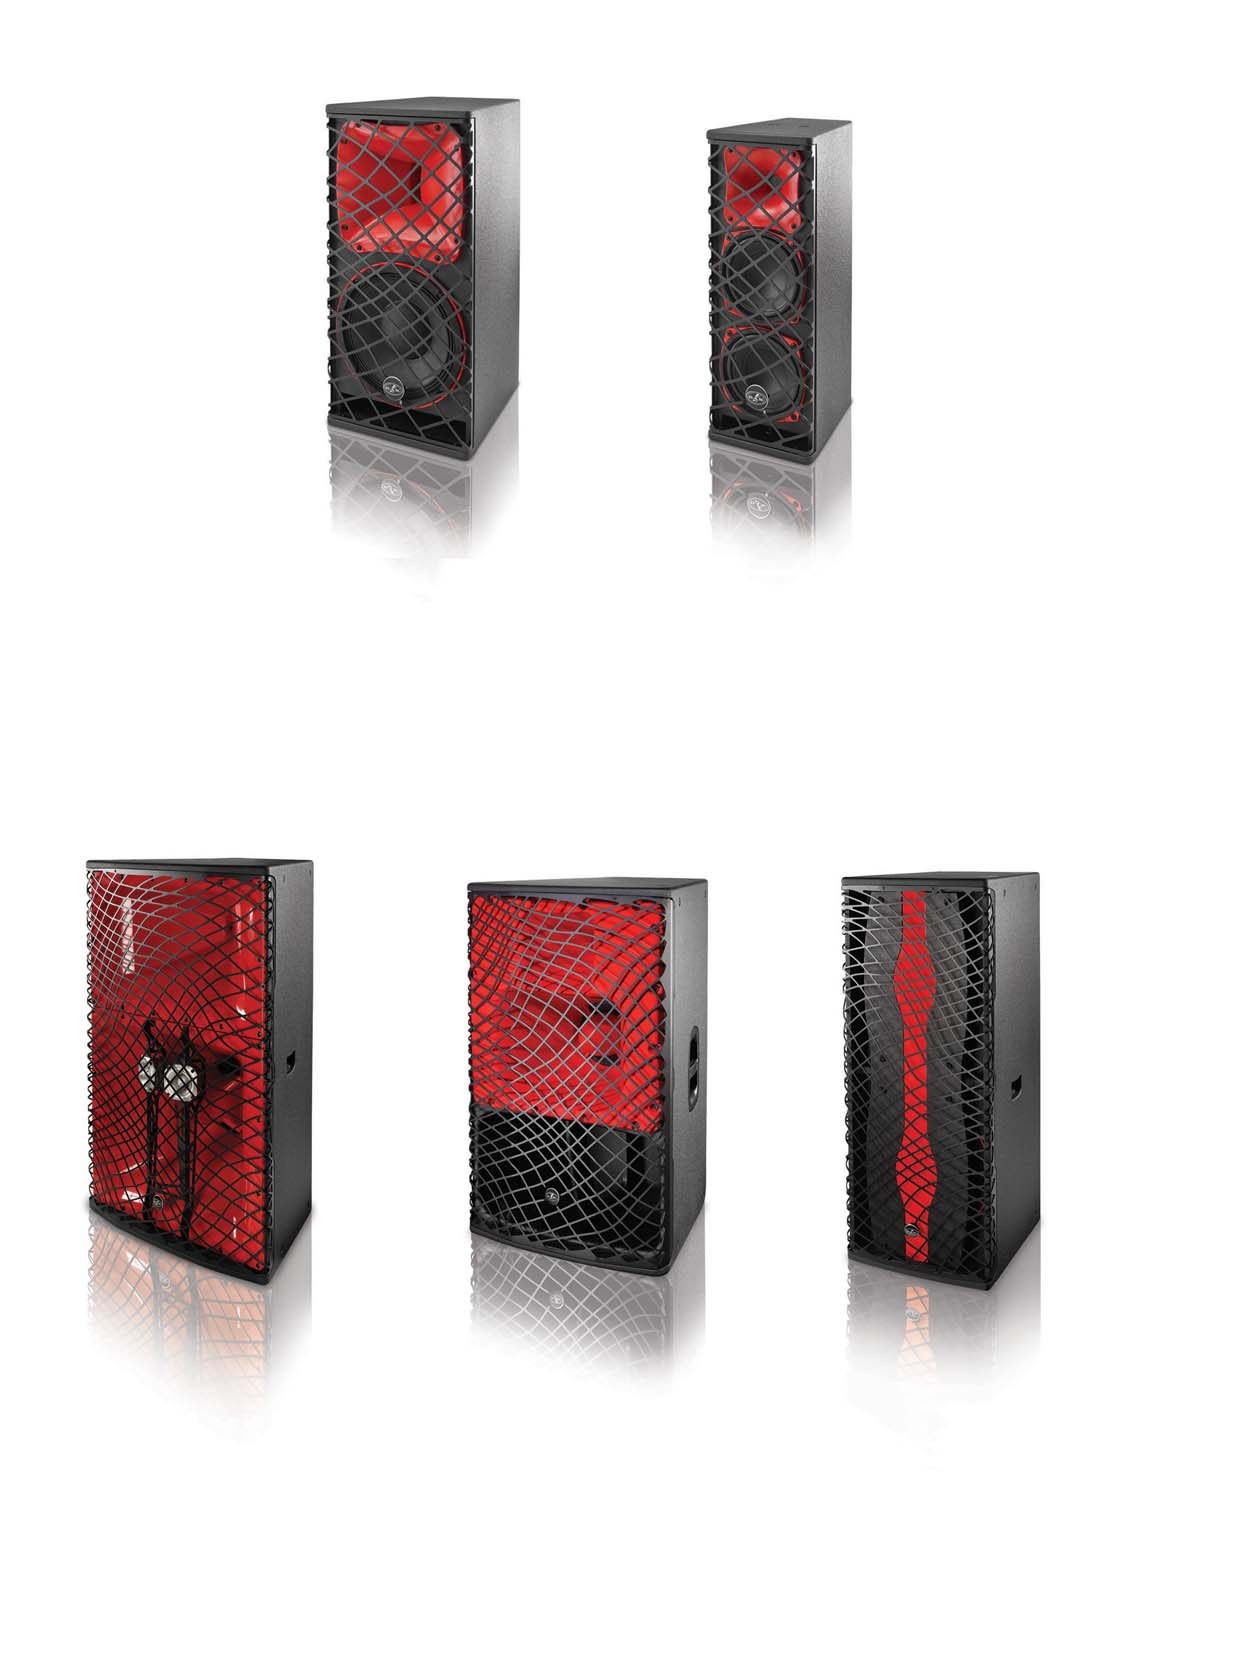 SOUND FORCE SF-10 1 x motor de compresión M- 1 x low frequency loudspeaker 1 x M- compression driver Vertical or horizontal positioning SF-26 1 x motor de compresión M- 88 2 x 6 low frequency